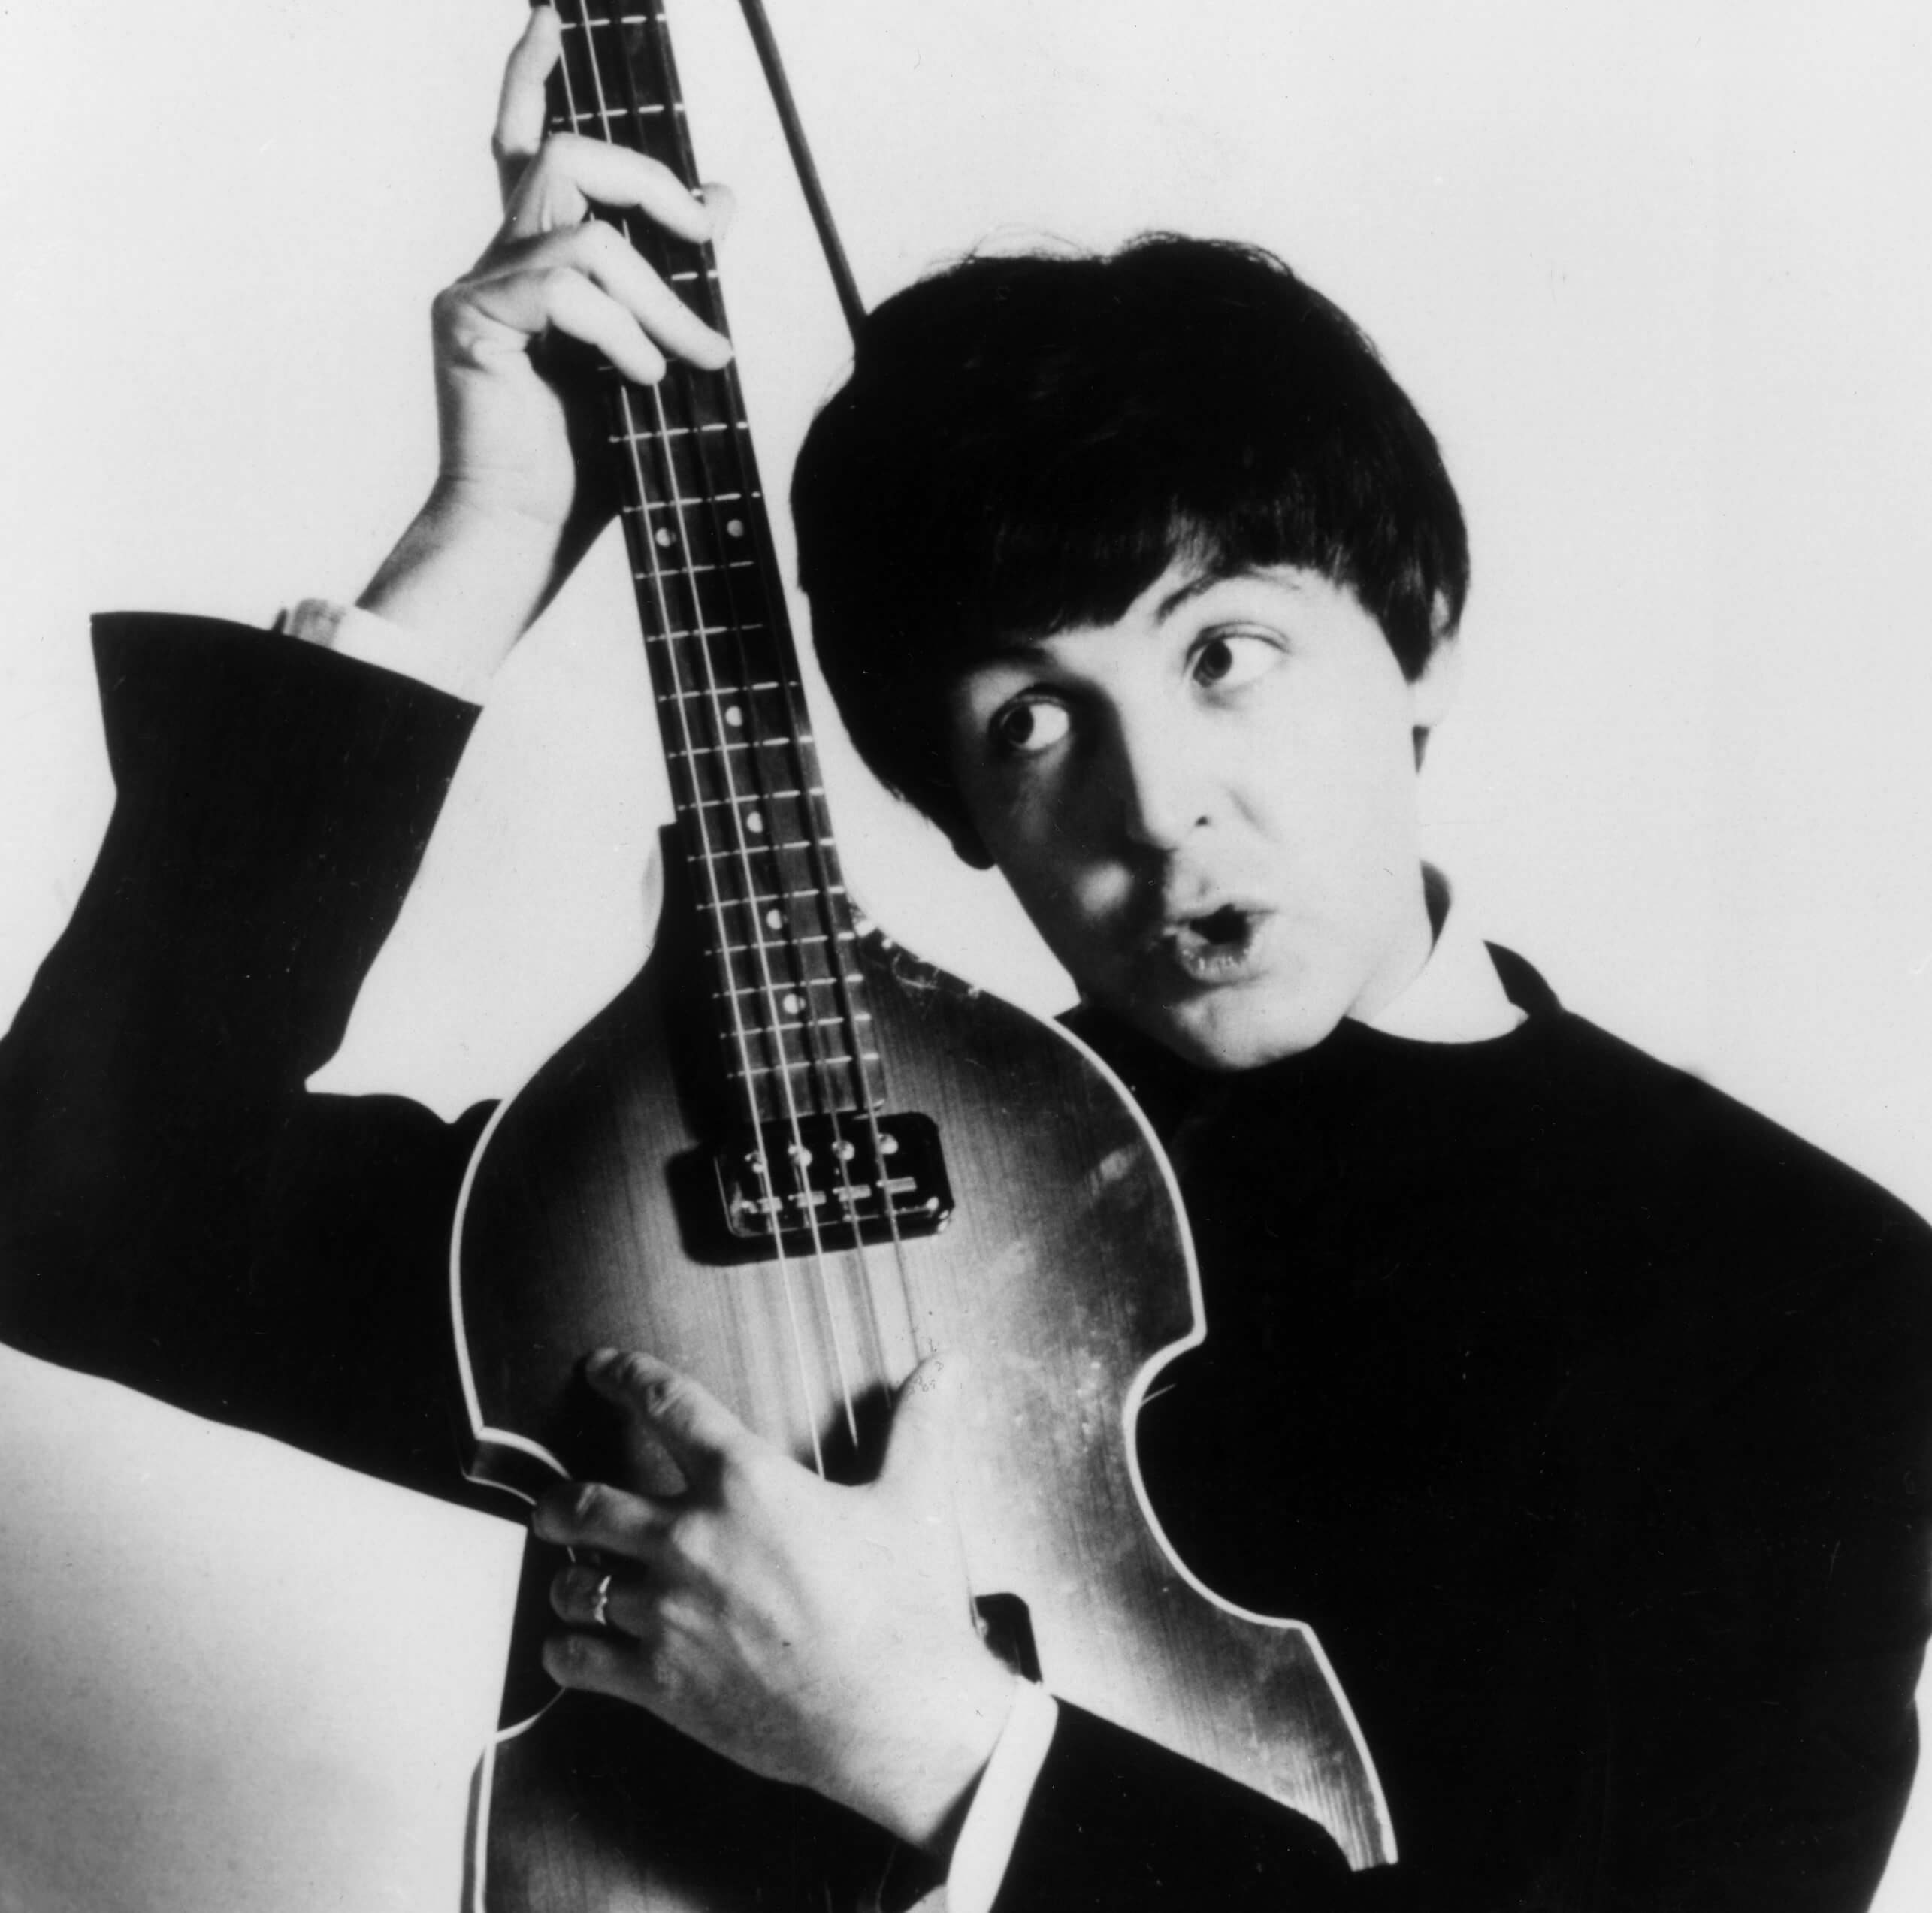 Paul McCartney with an instrument